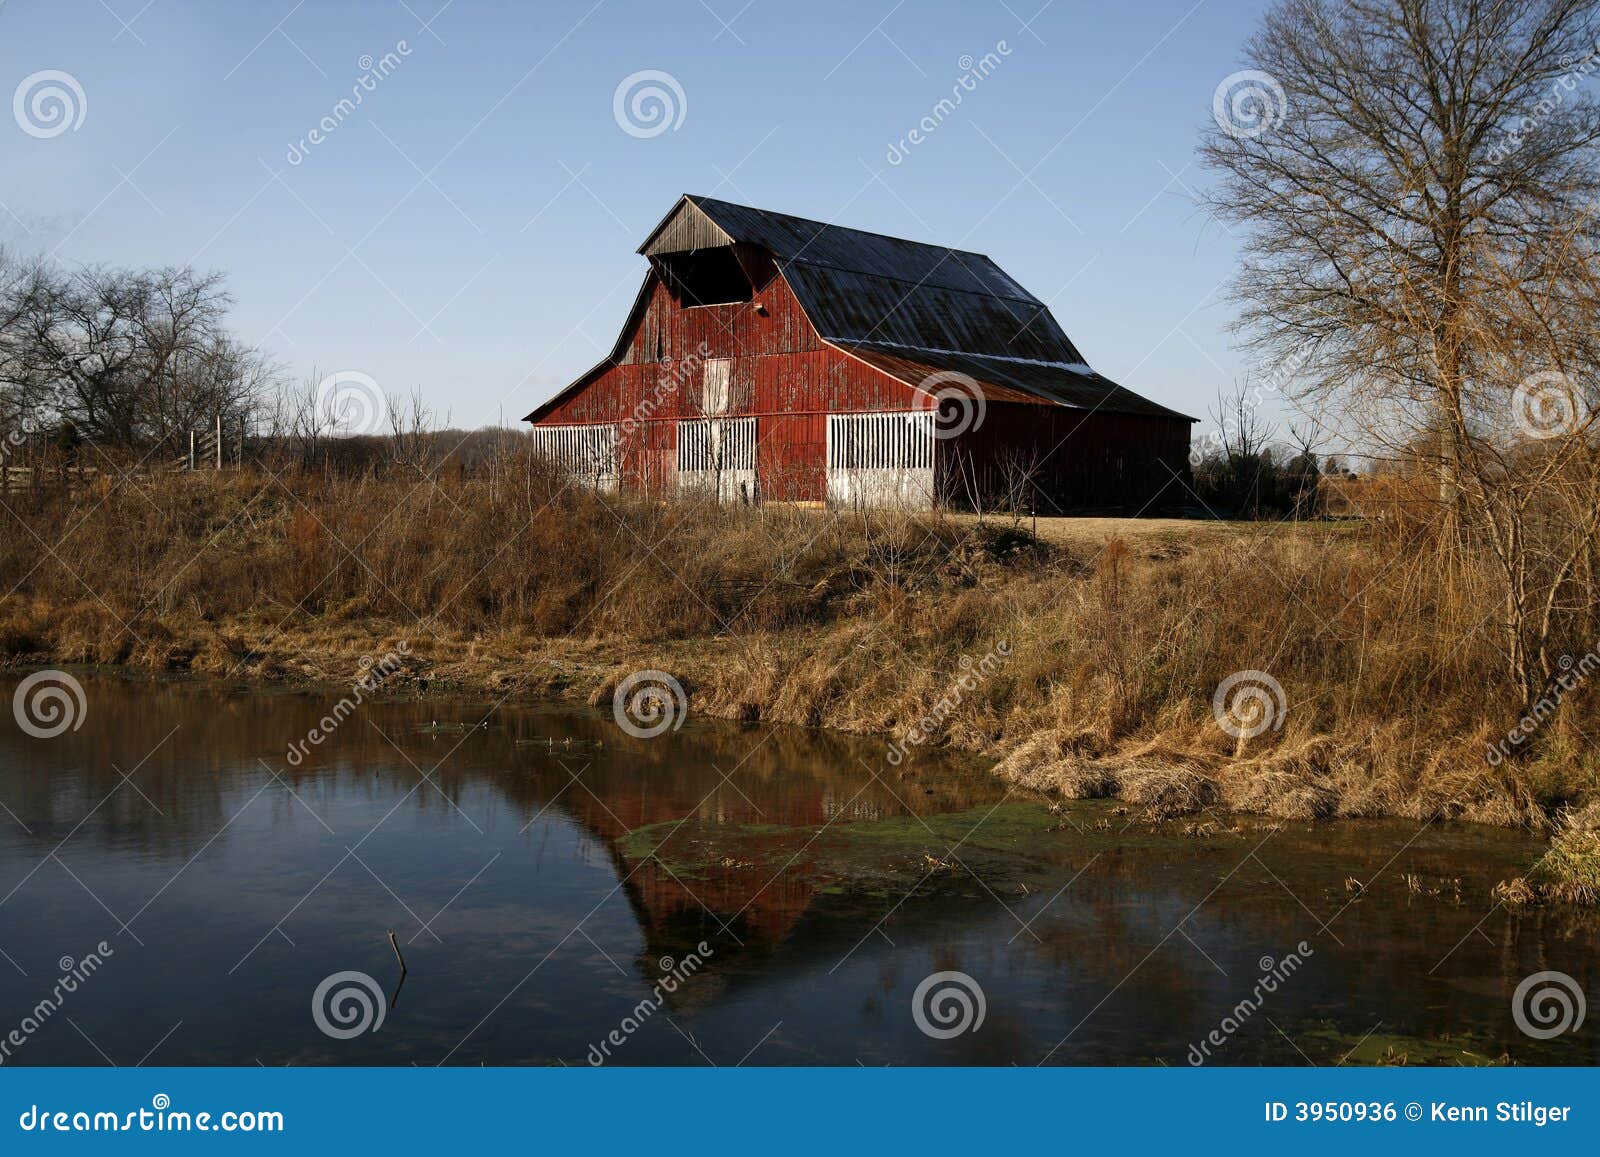 Tennessee Farm Scenes stock photo. Image of agriculture - 3950936